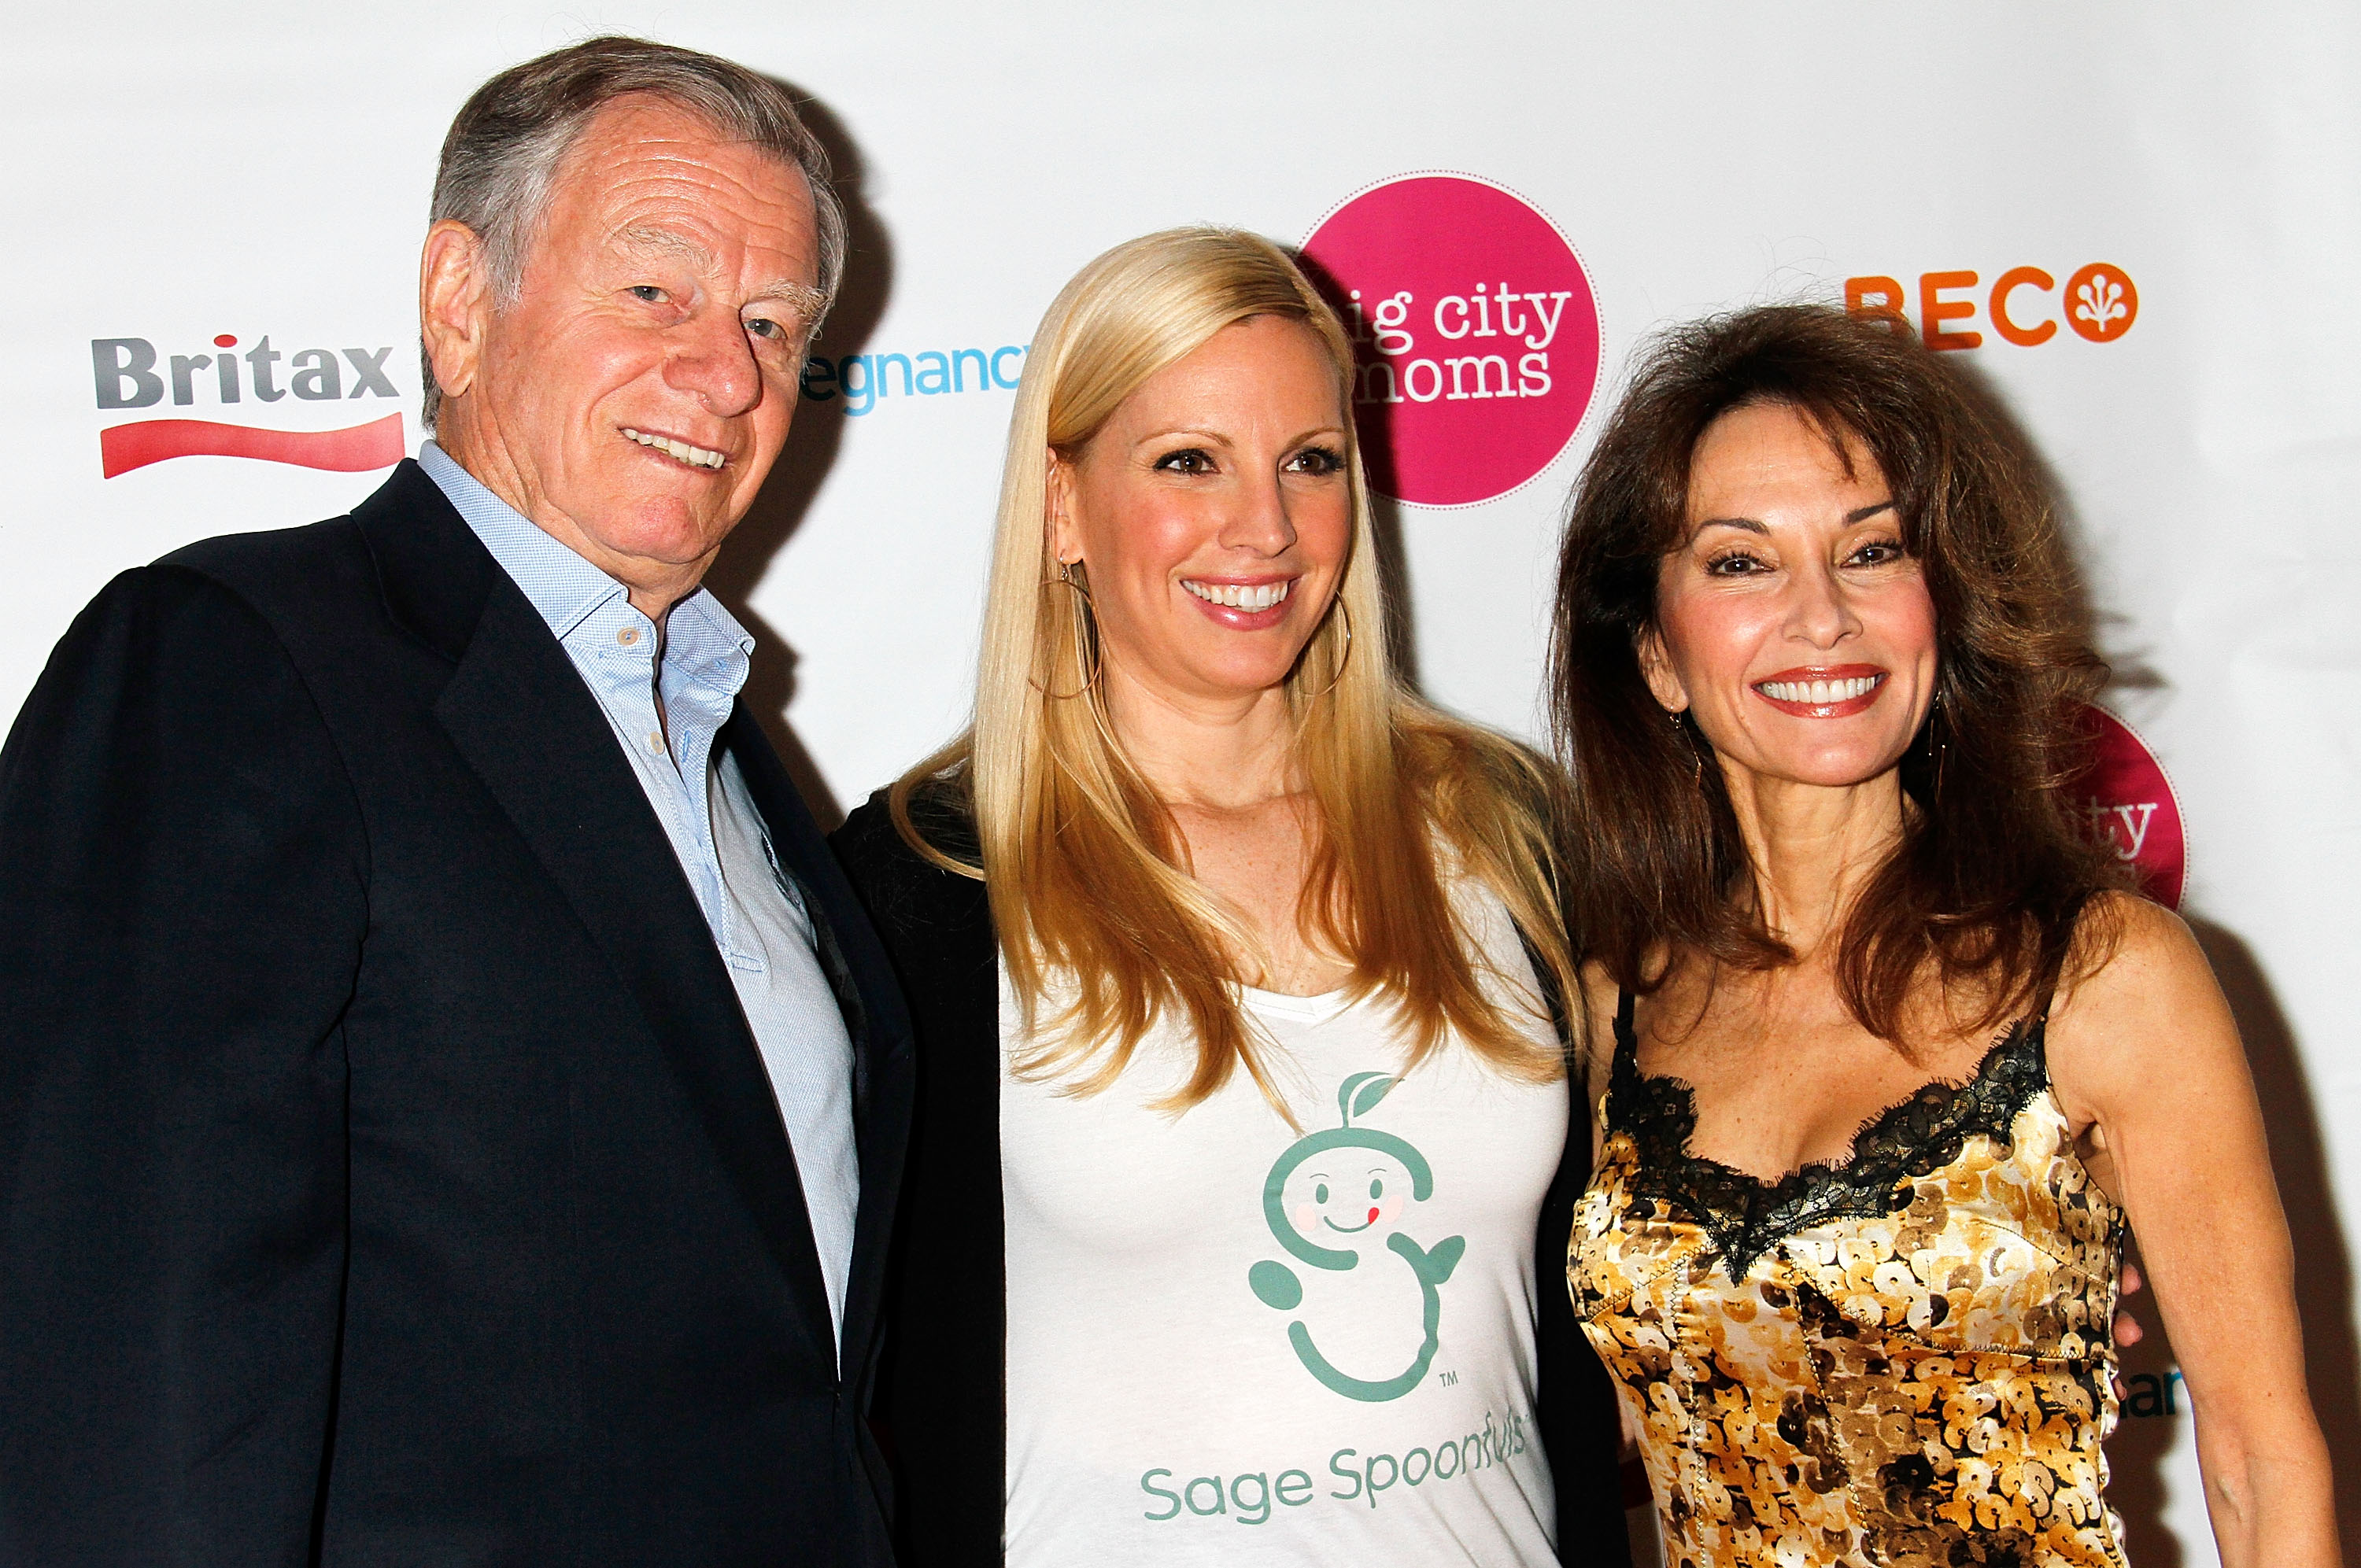 Susan Lucci (right), along with her husband Helmut Huber (left) and daughter Liza Huber (center), at the 16th annual Big City Moms Biggest Baby Shower Ever held at Metropolitan Pavilion in New York City on May 30, 2013 | Source: Getty Images